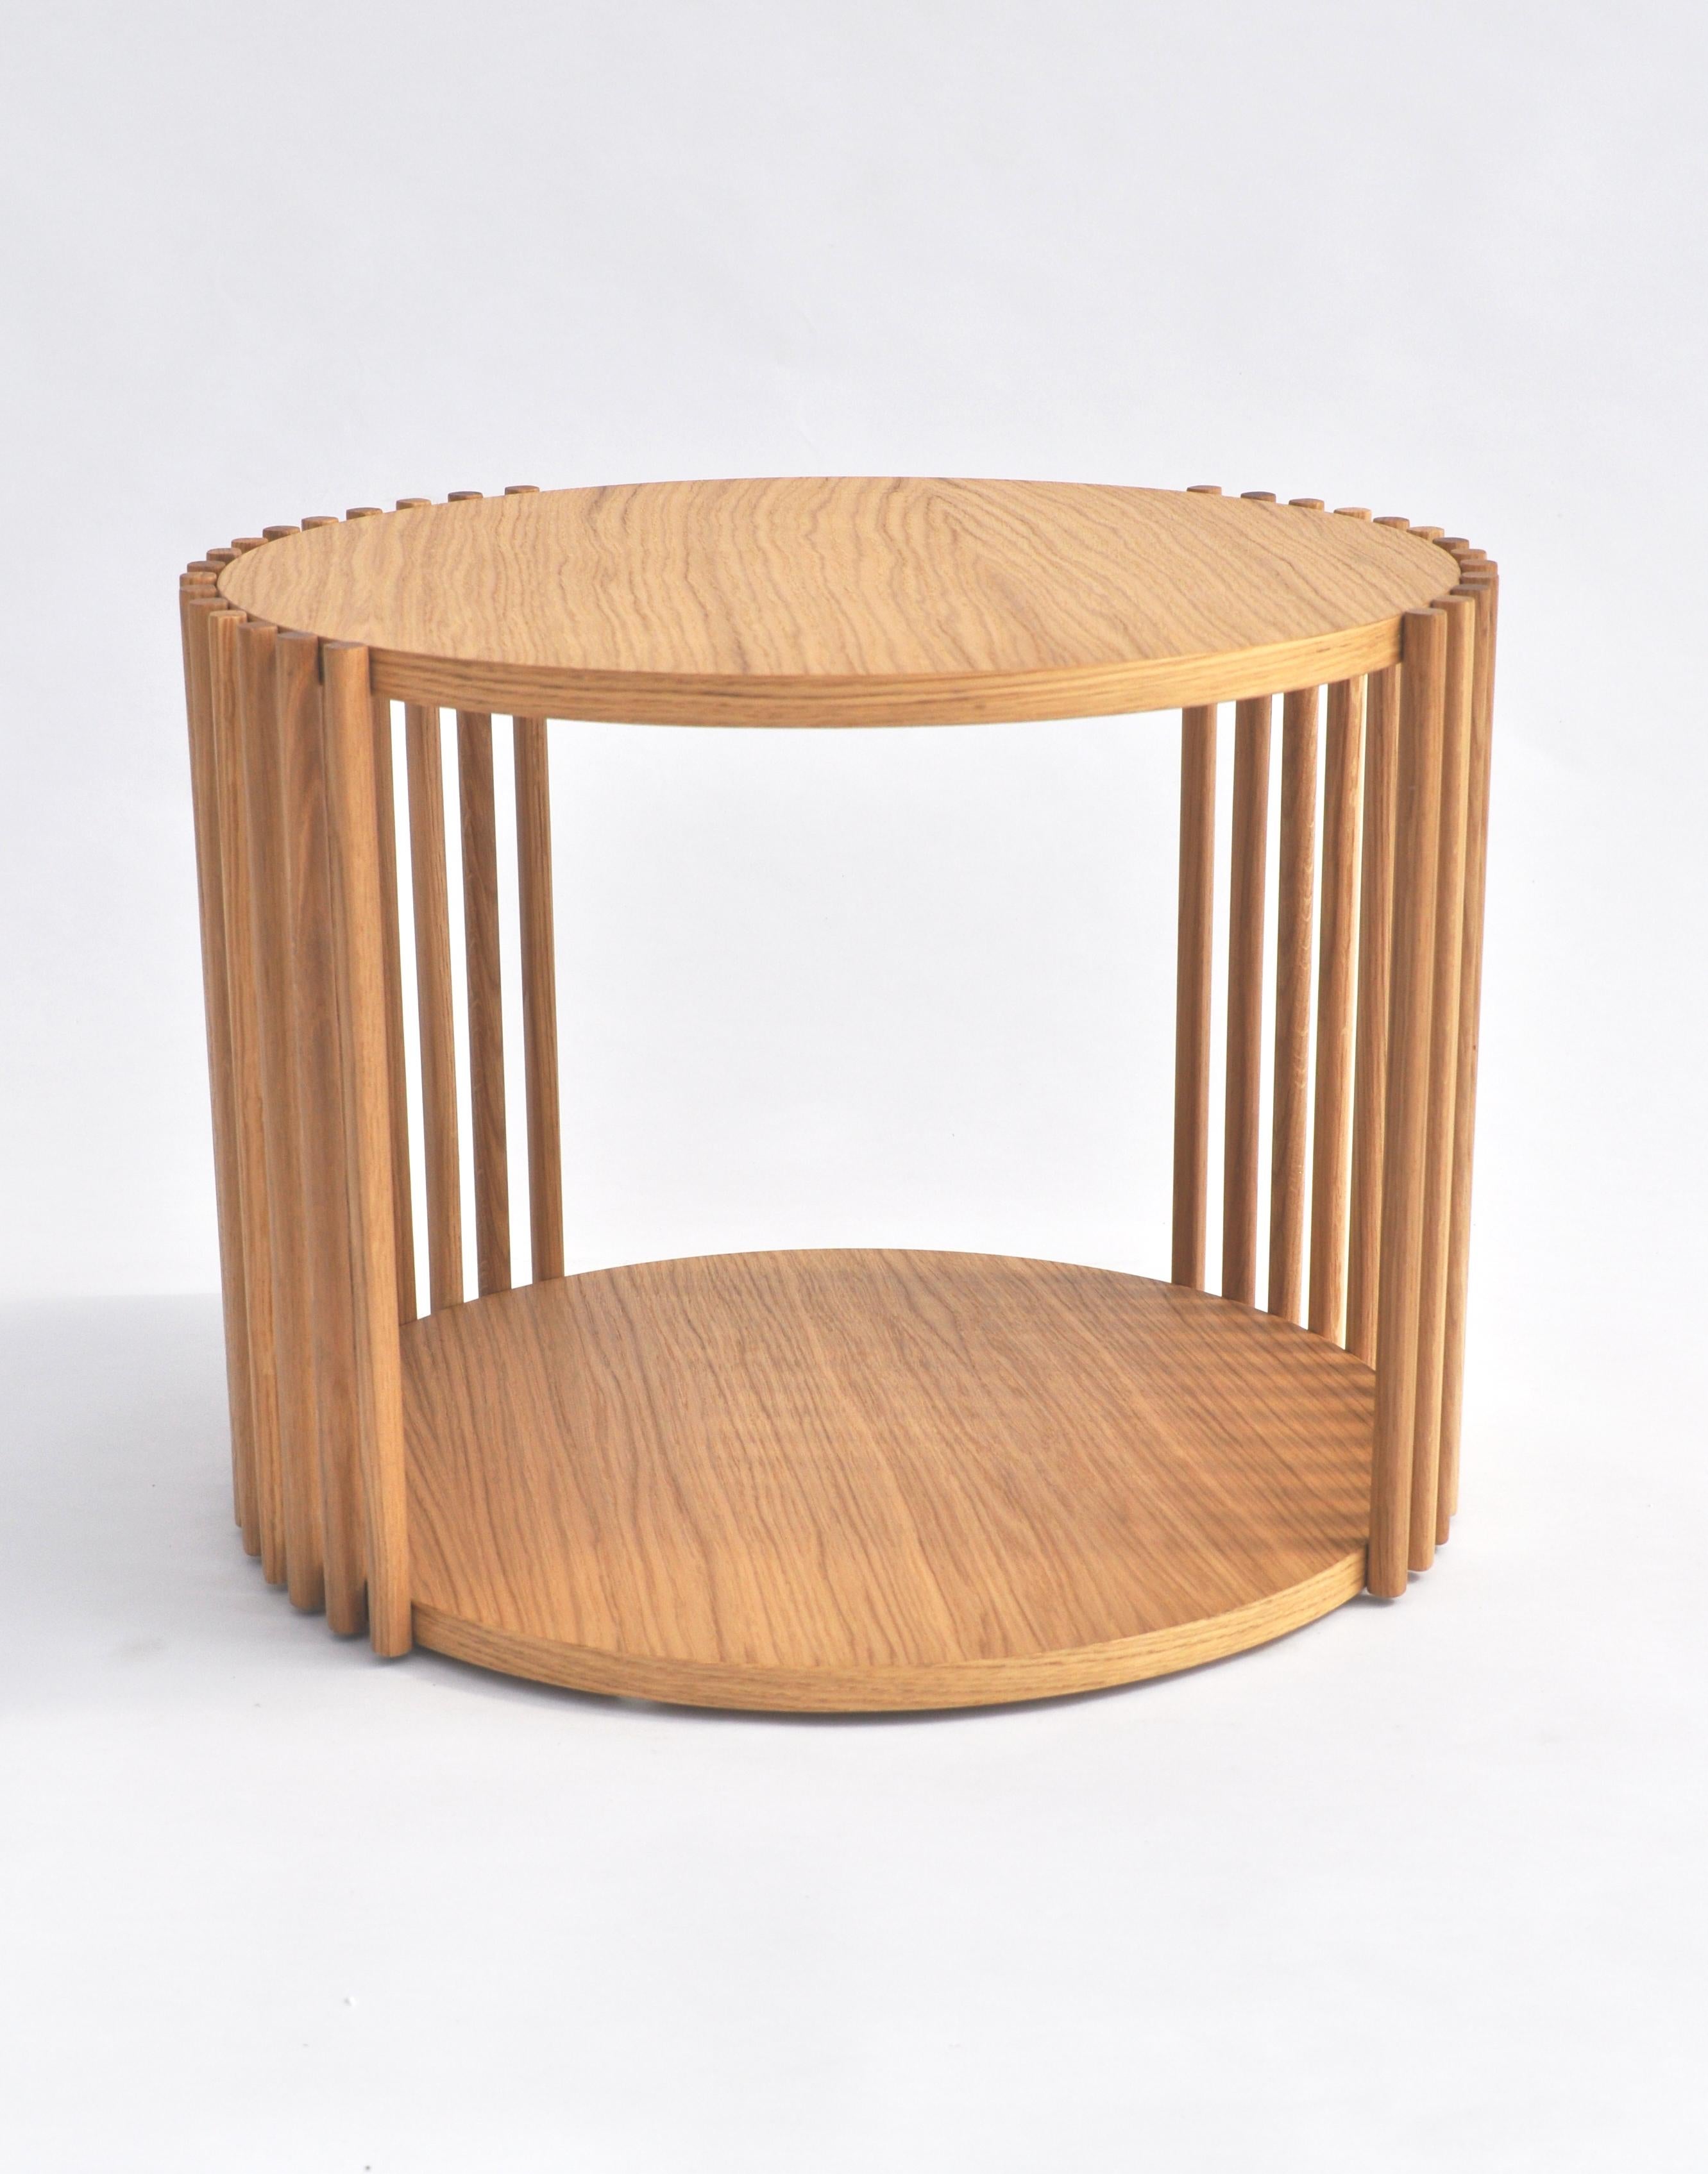 Coffee table from the Palafitte collection, made up of solid wood strips that support the veneered Oak tops.
Diameter Ø53xh.40cm.
Venice, the floating city, with its urban system based on a myriad of poles immersed in the water, provides the